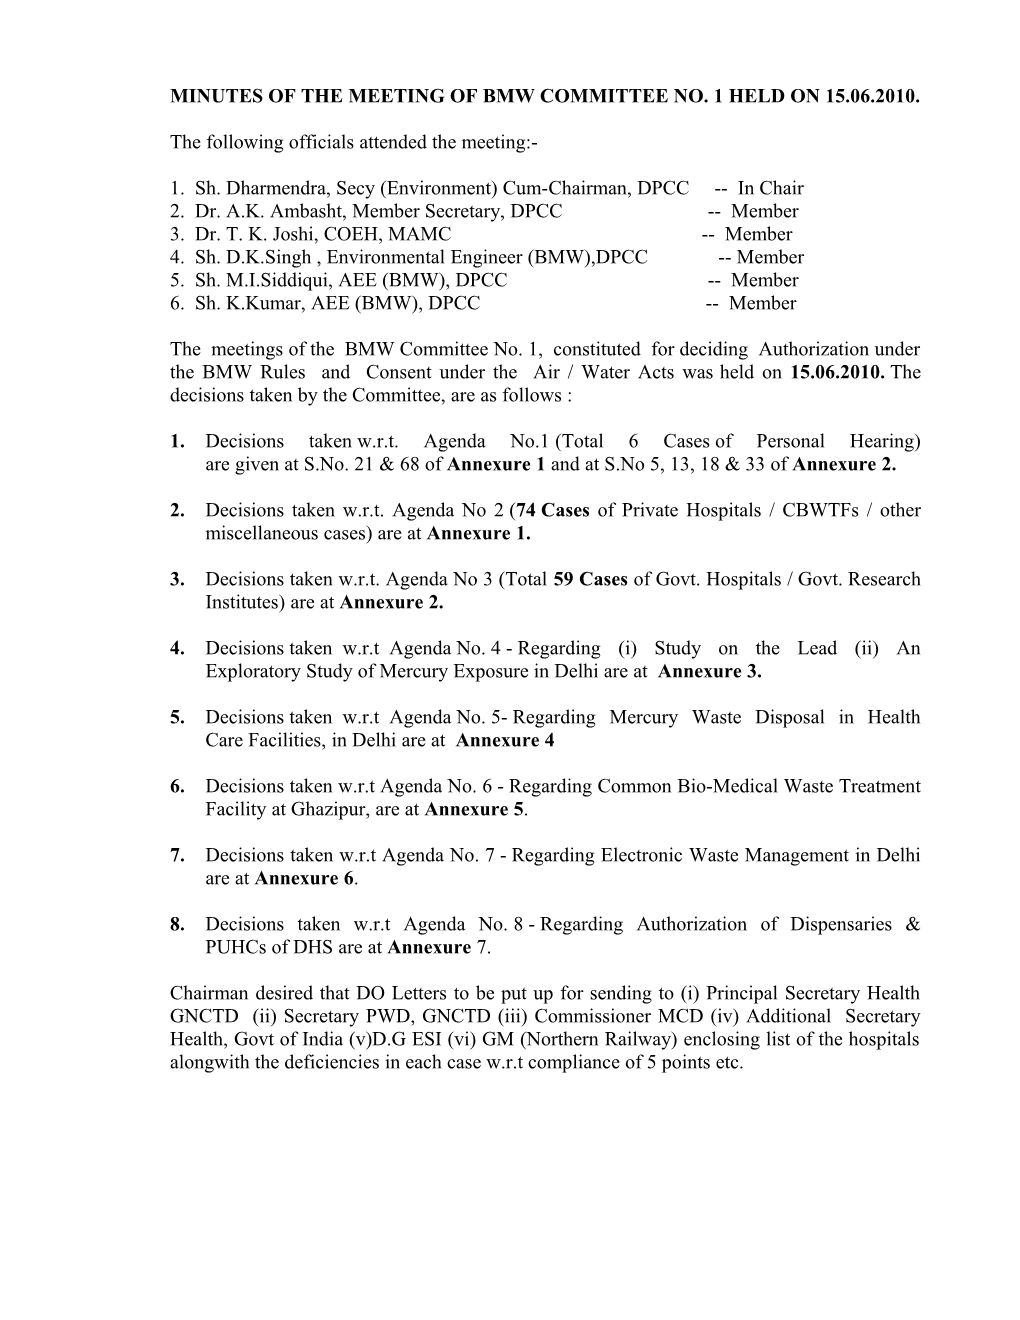 Minutes of the Meeting of Bmw Committee No. 1 Held on 15.06.2010